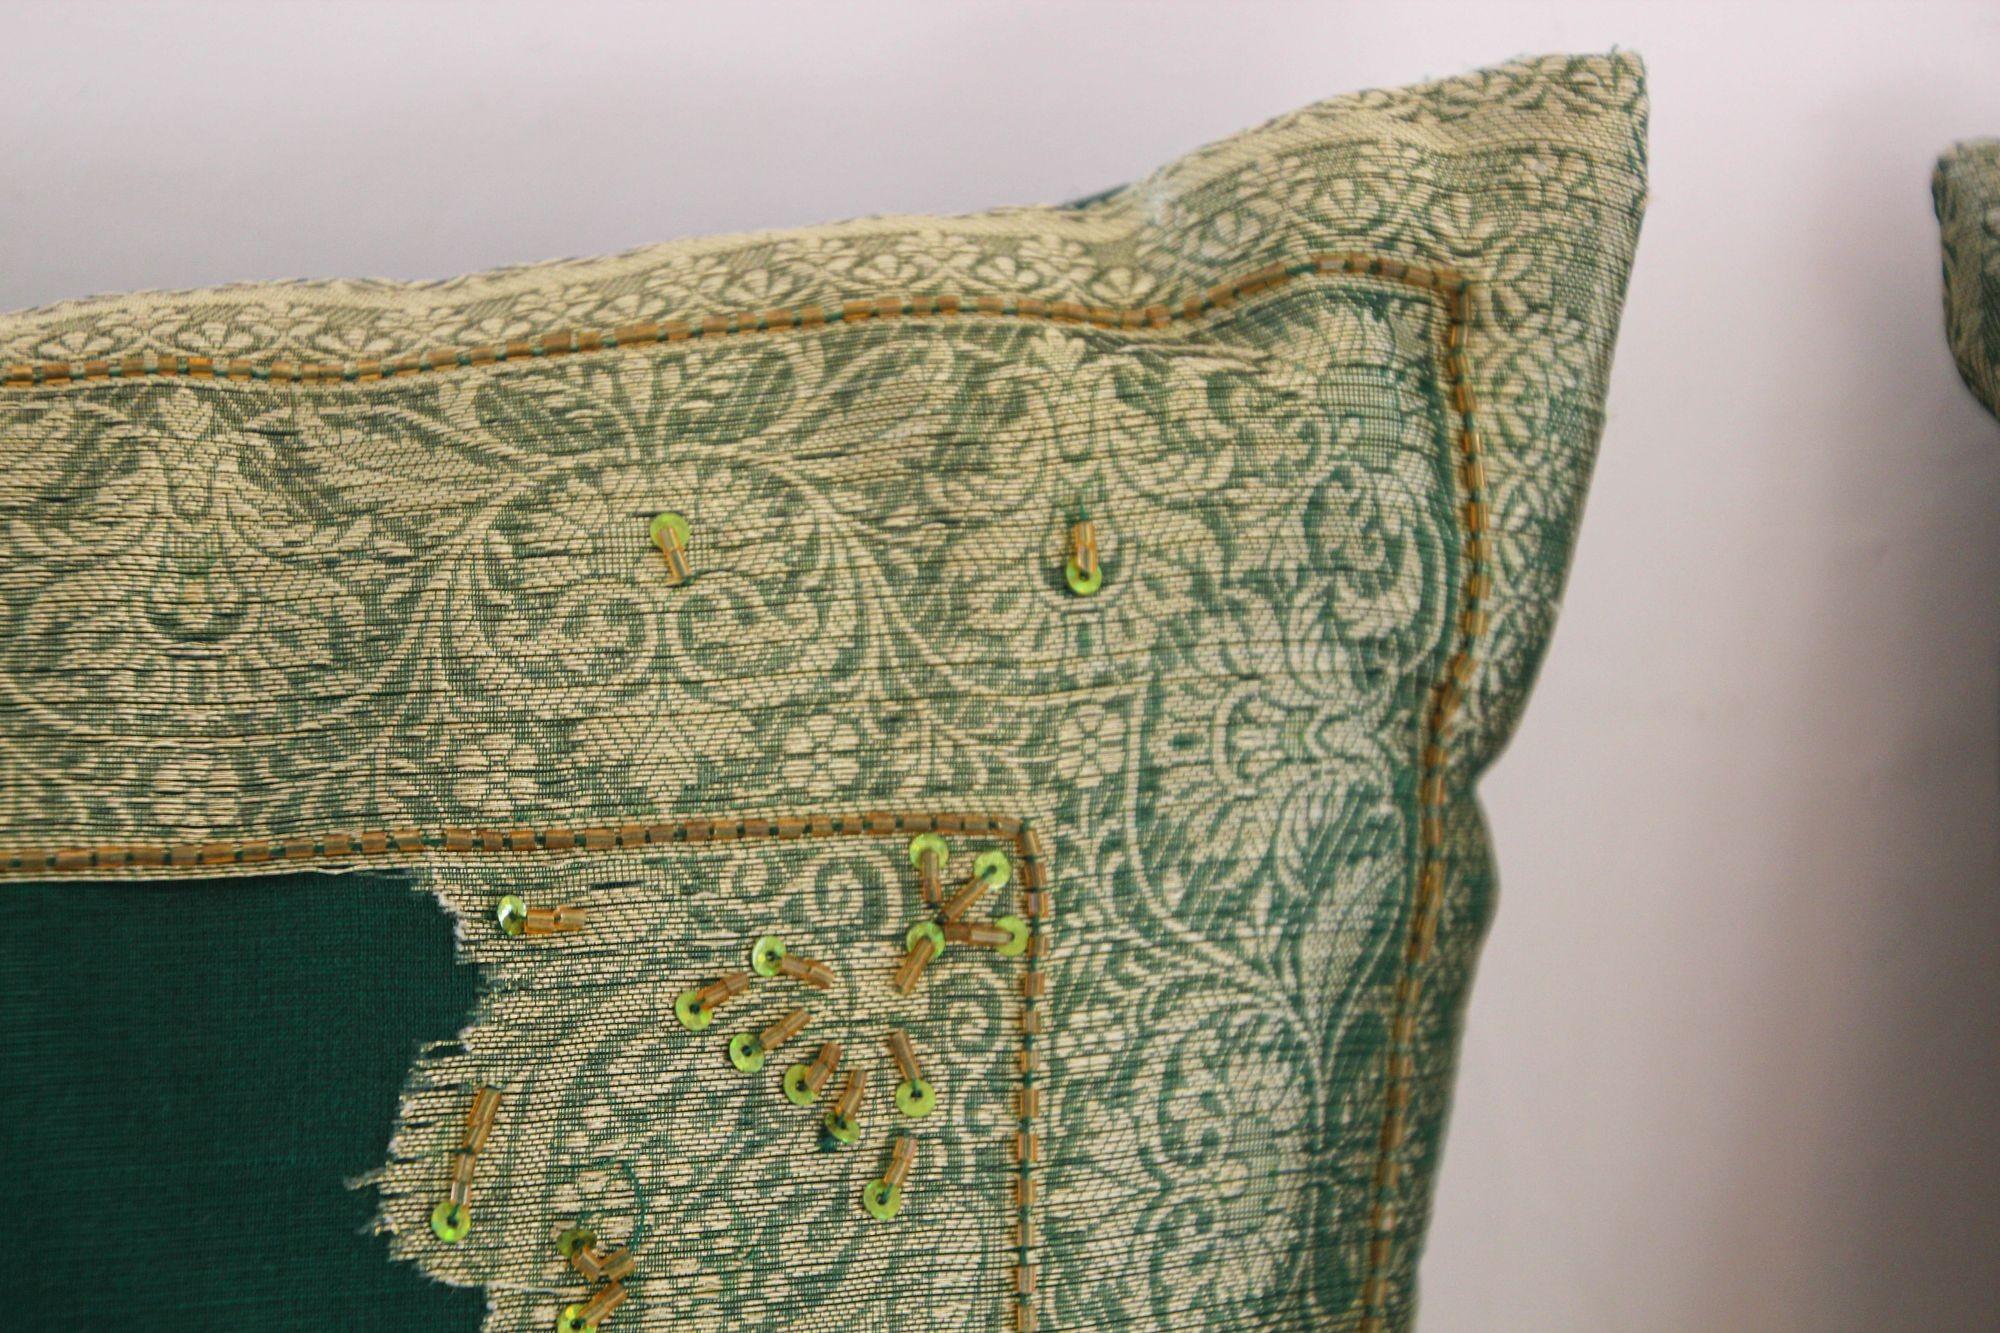 Emerald Green Moorish throw Pillows Embellished with Sequins and Beads a Pair.
Two Moorish throw decorative accent rich emerald green pillows embroidered and embellished with sequins with metallic threads, gold beads embroidery on emerald green silk